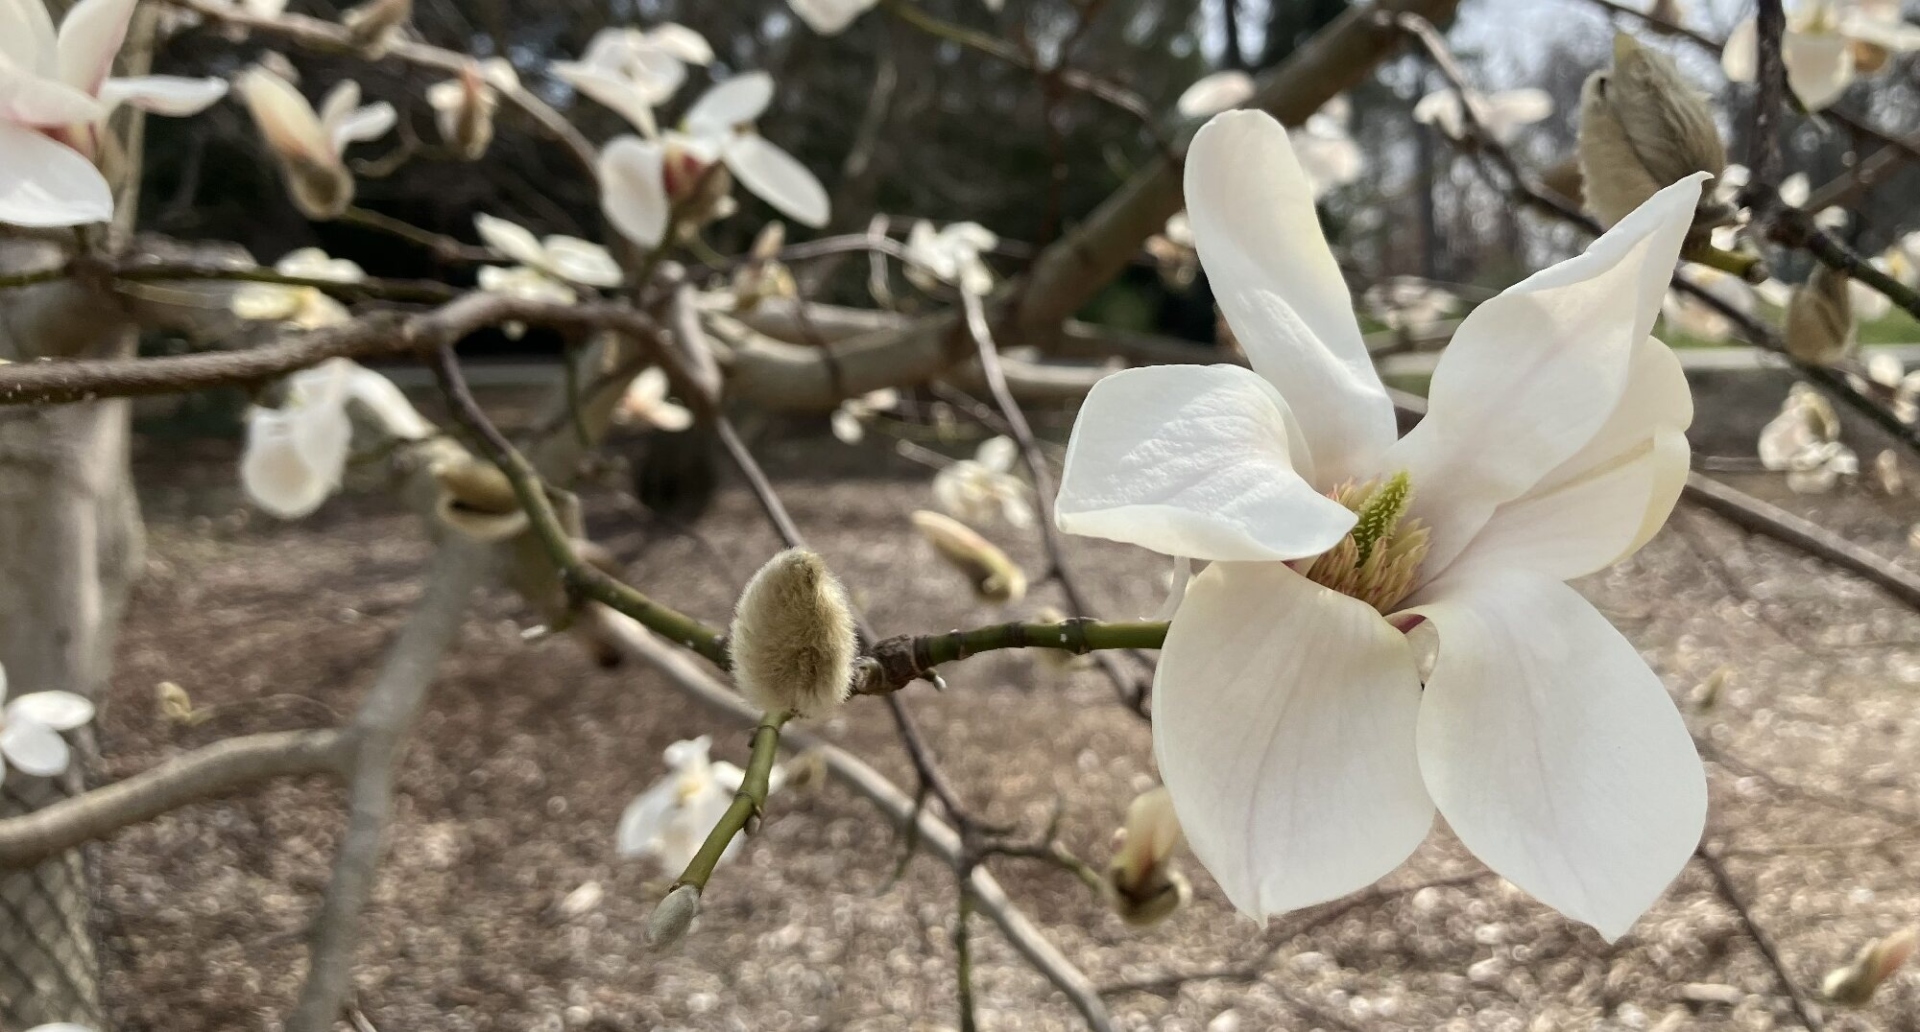 Photograph of Chinese willow-leaved magnolia flowers